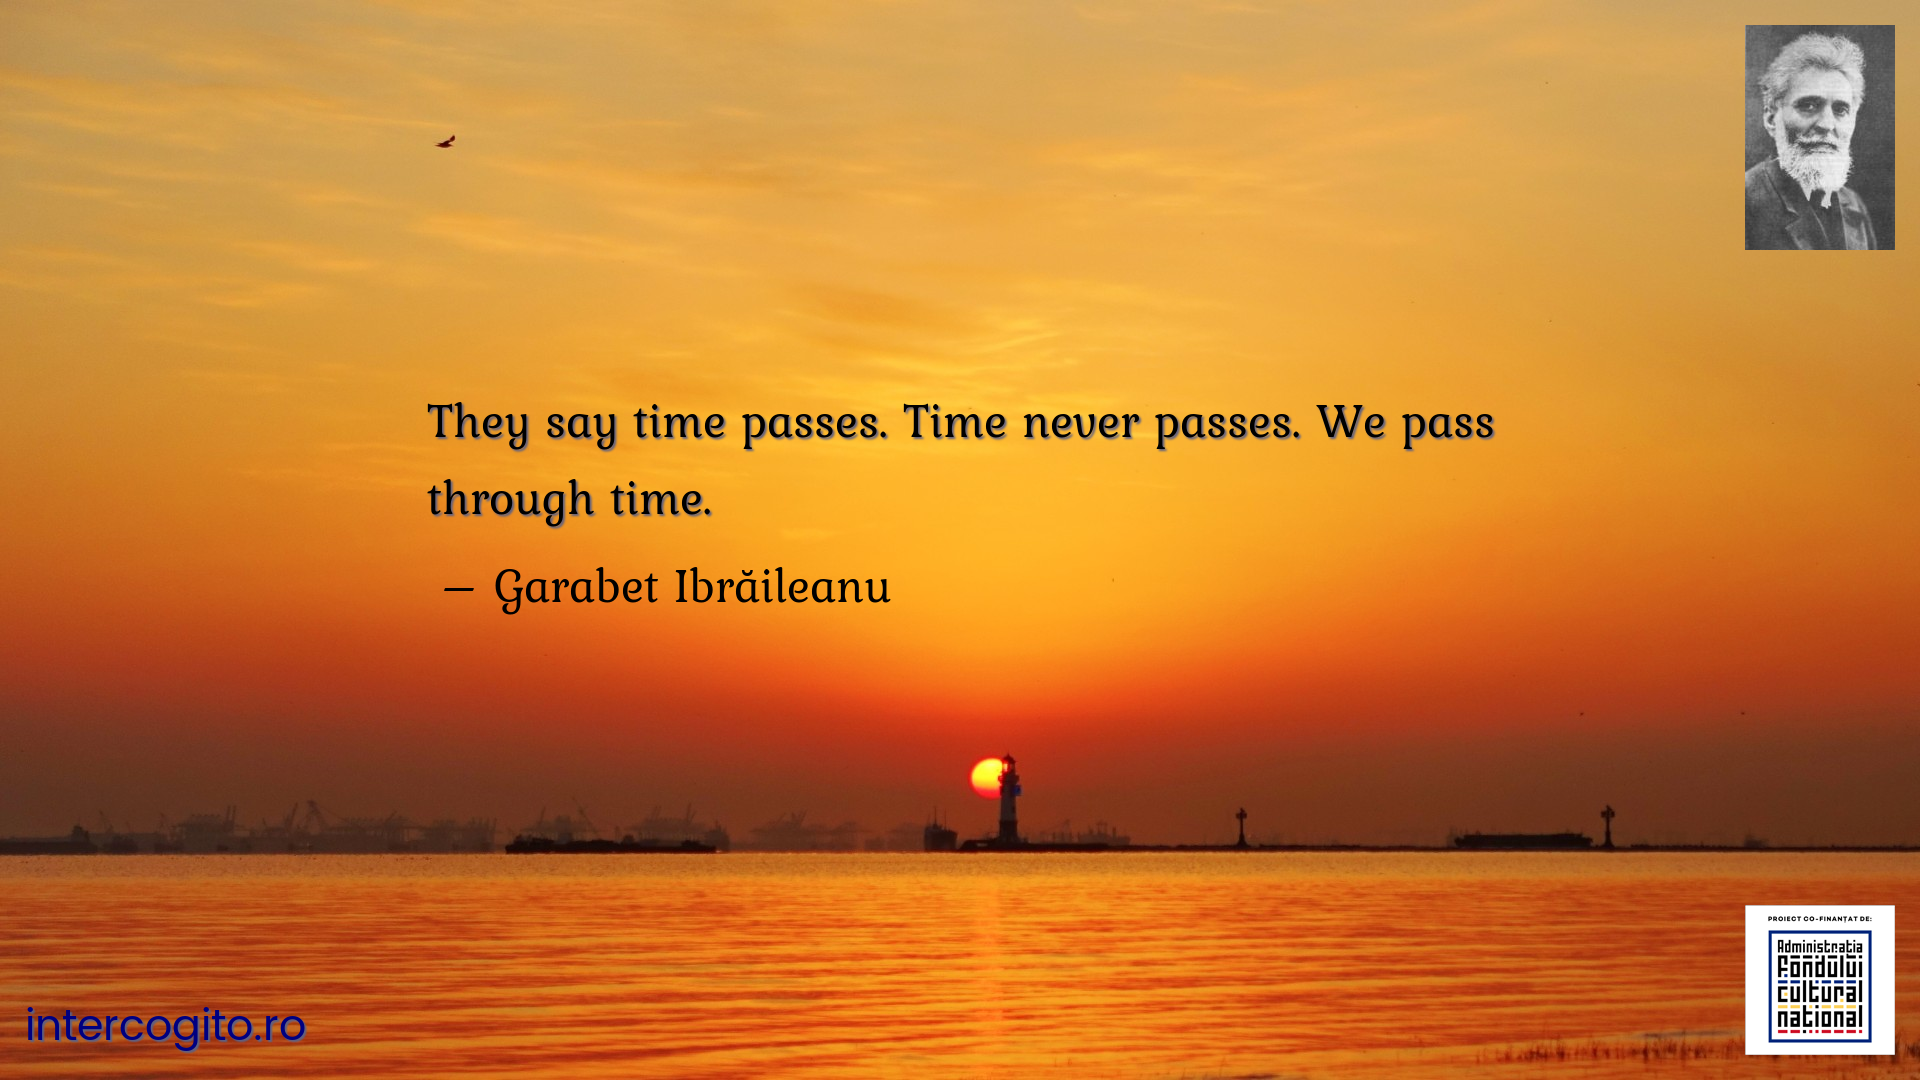 They say time passes. Time never passes. We pass through time.